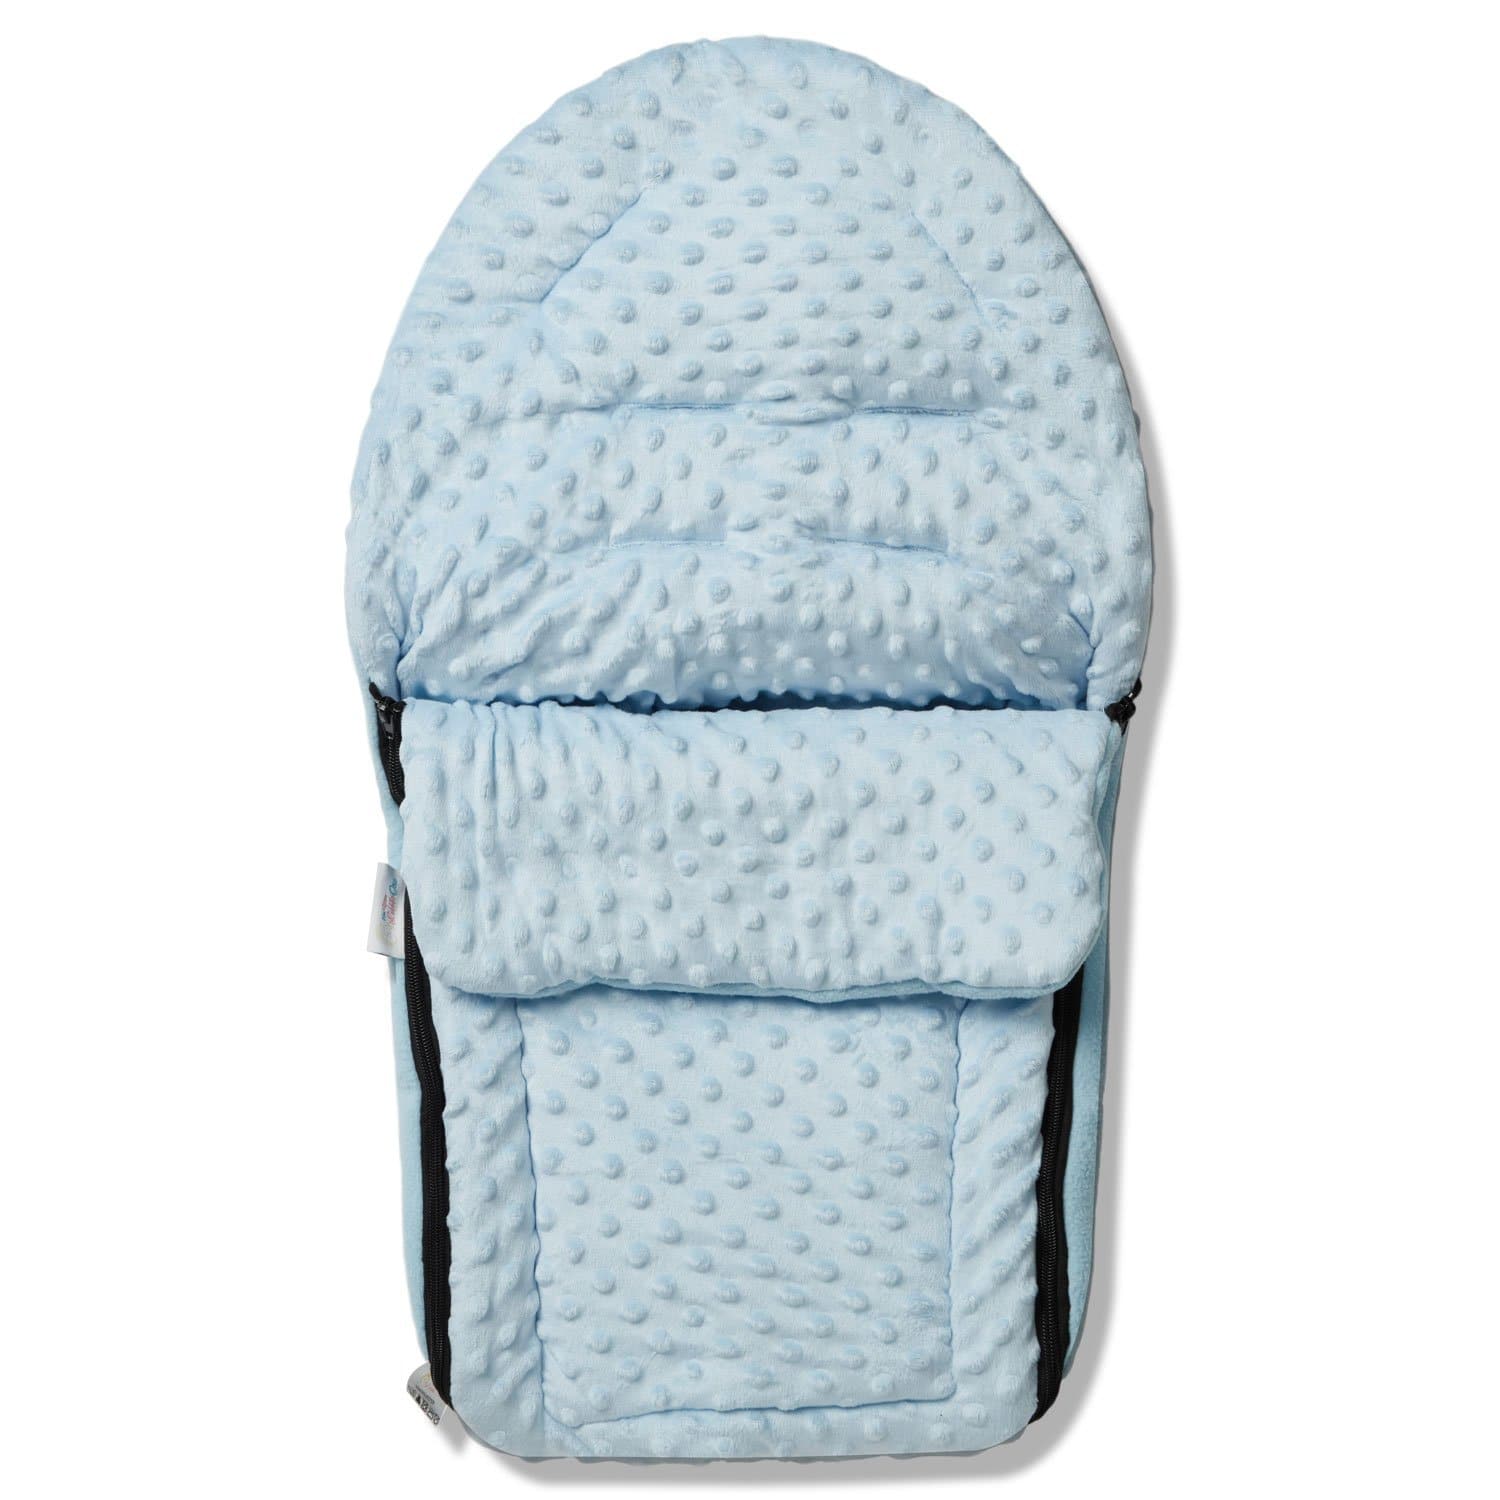 Dimple Car Seat Footmuff / Cosy Toes Compatible with Bebecar - Blue / Fits All Models | For Your Little One